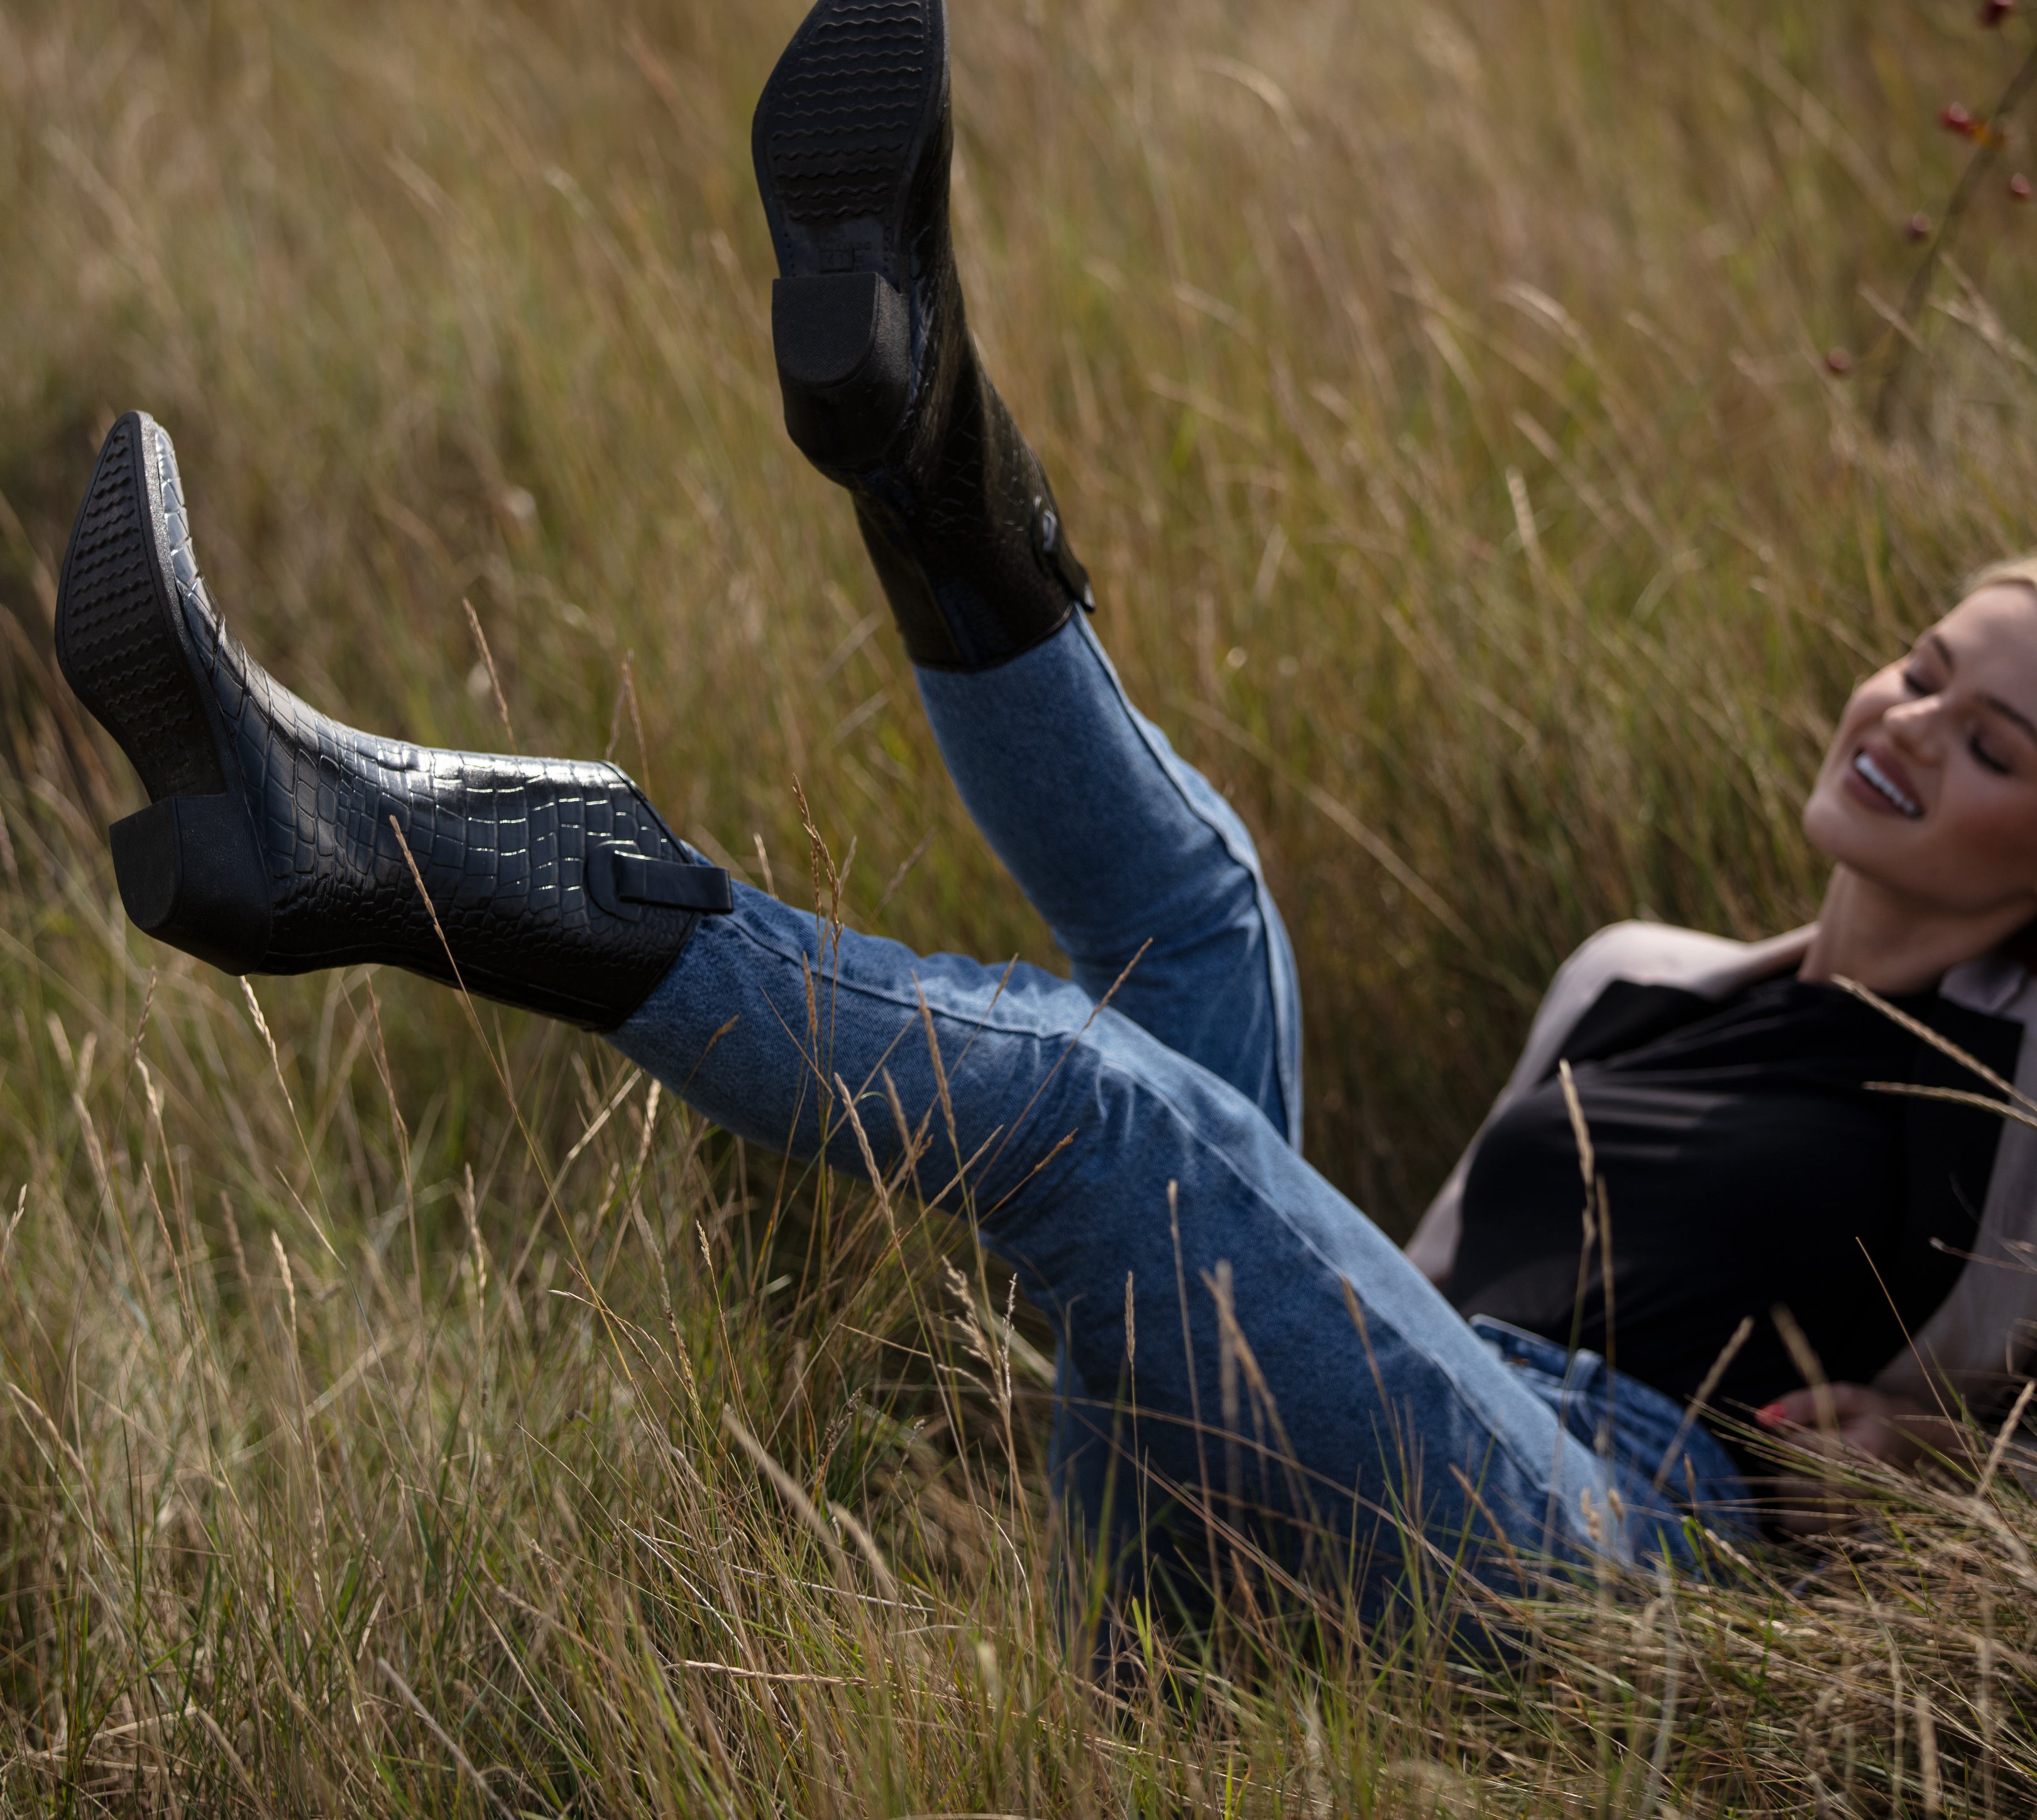 Lying in the long grass kicking feet in the air wearing Talolo urban cowboy boots wellies